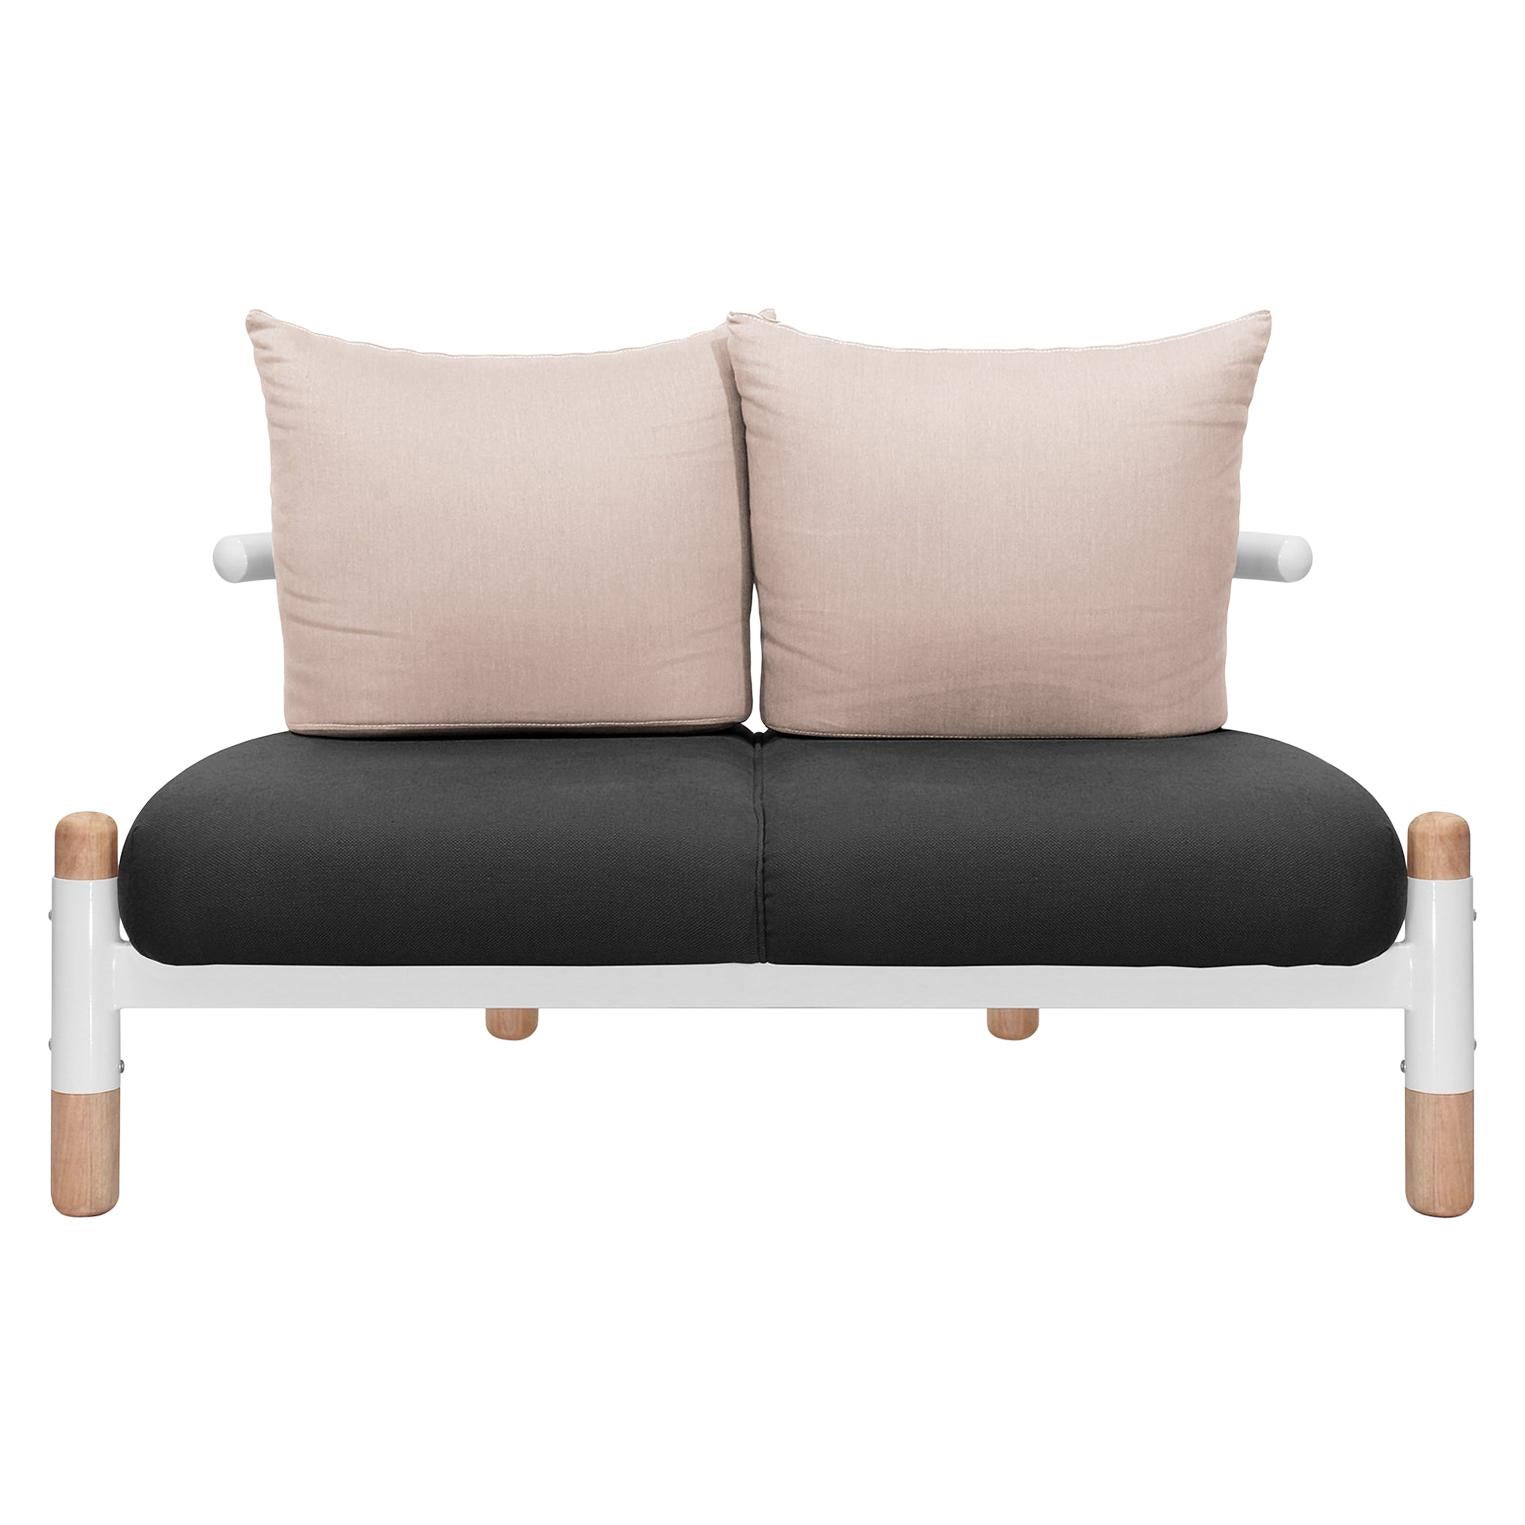 Black PK15 Two-Seat Sofa, Carbon Steel Structure and Wood Legs by Paulo Kobylka For Sale